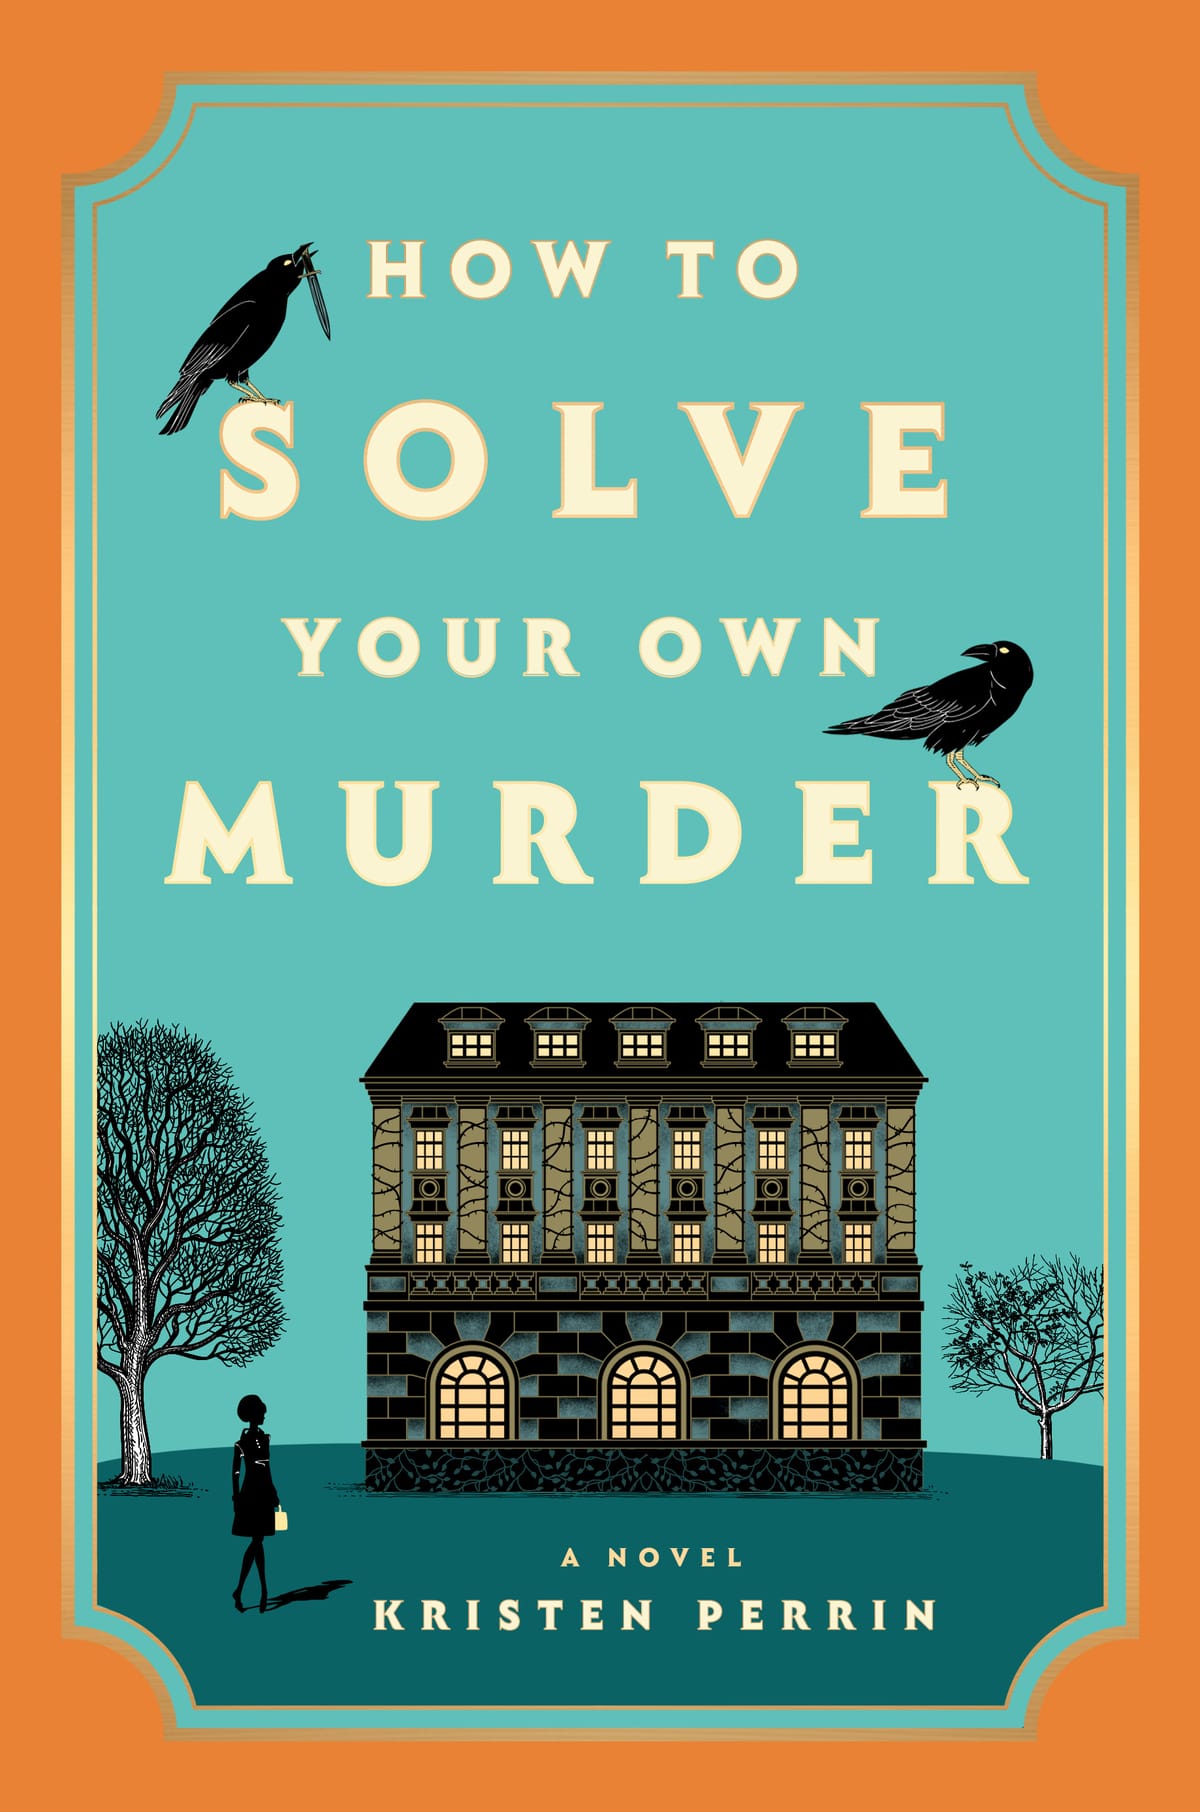 Chapter 1: How to Solve Your Own Murder by Kristen Perrin